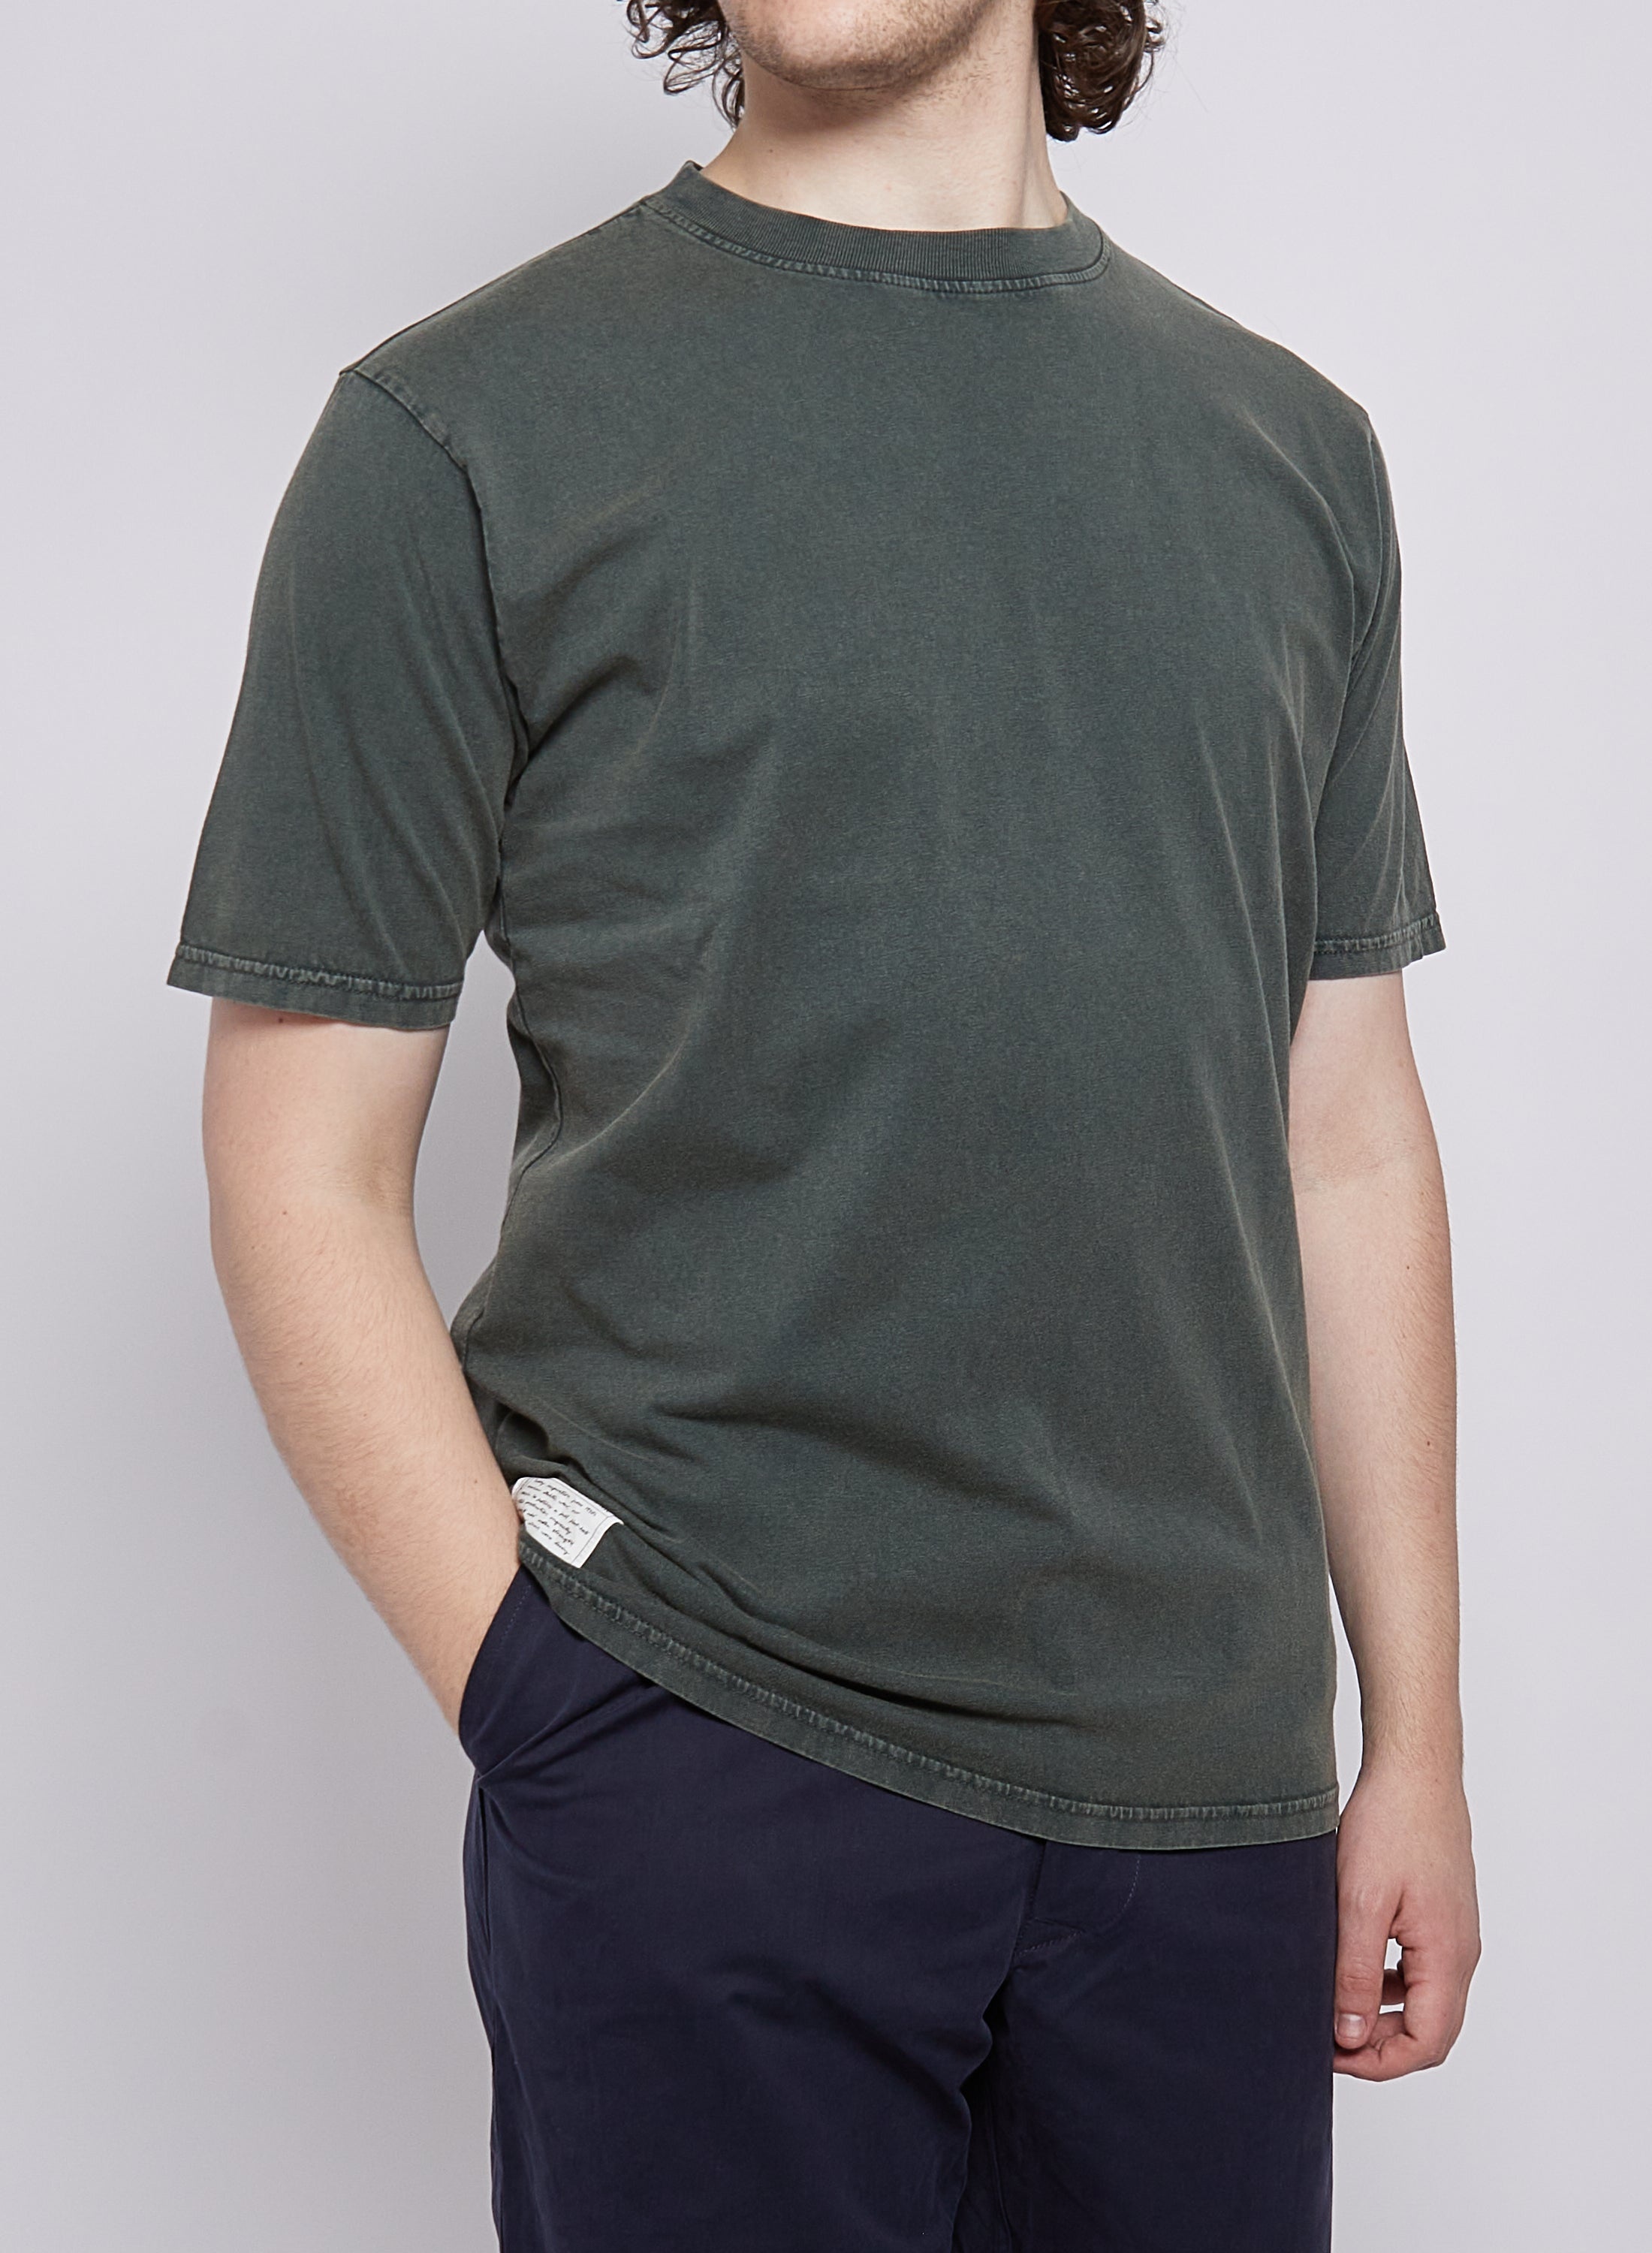 Classic Relaxed Fit Tee in Stone Wash Green - 3